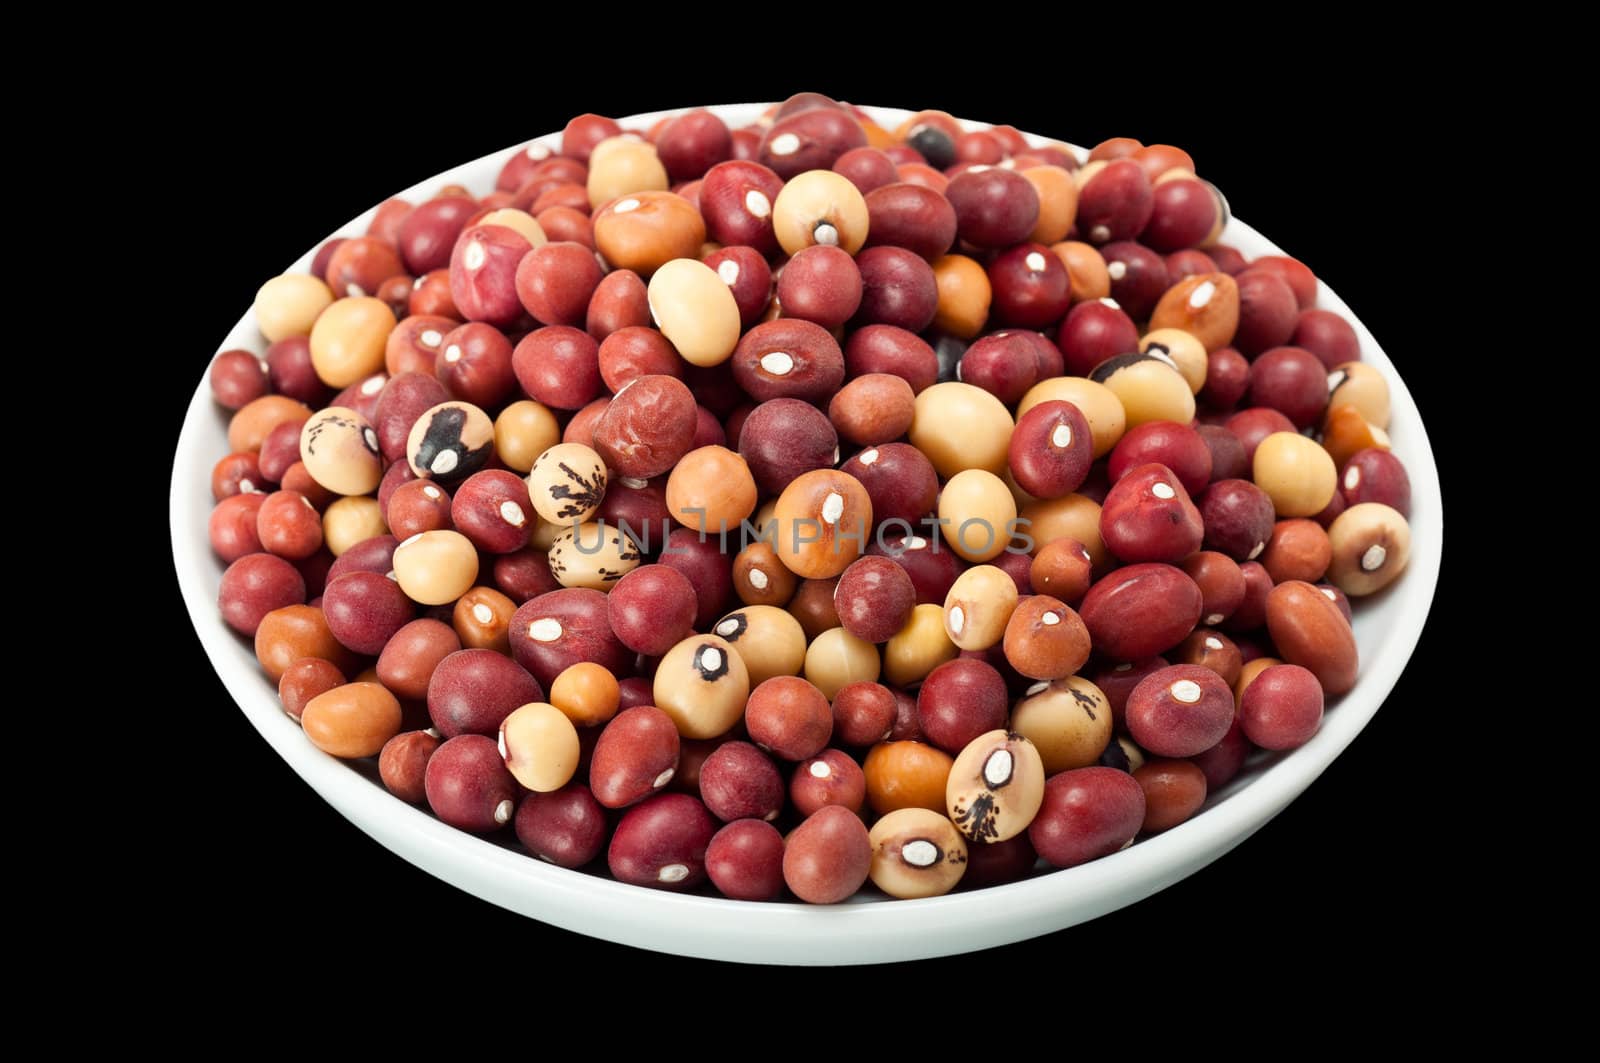 Bowl of Jugo Beans by timh